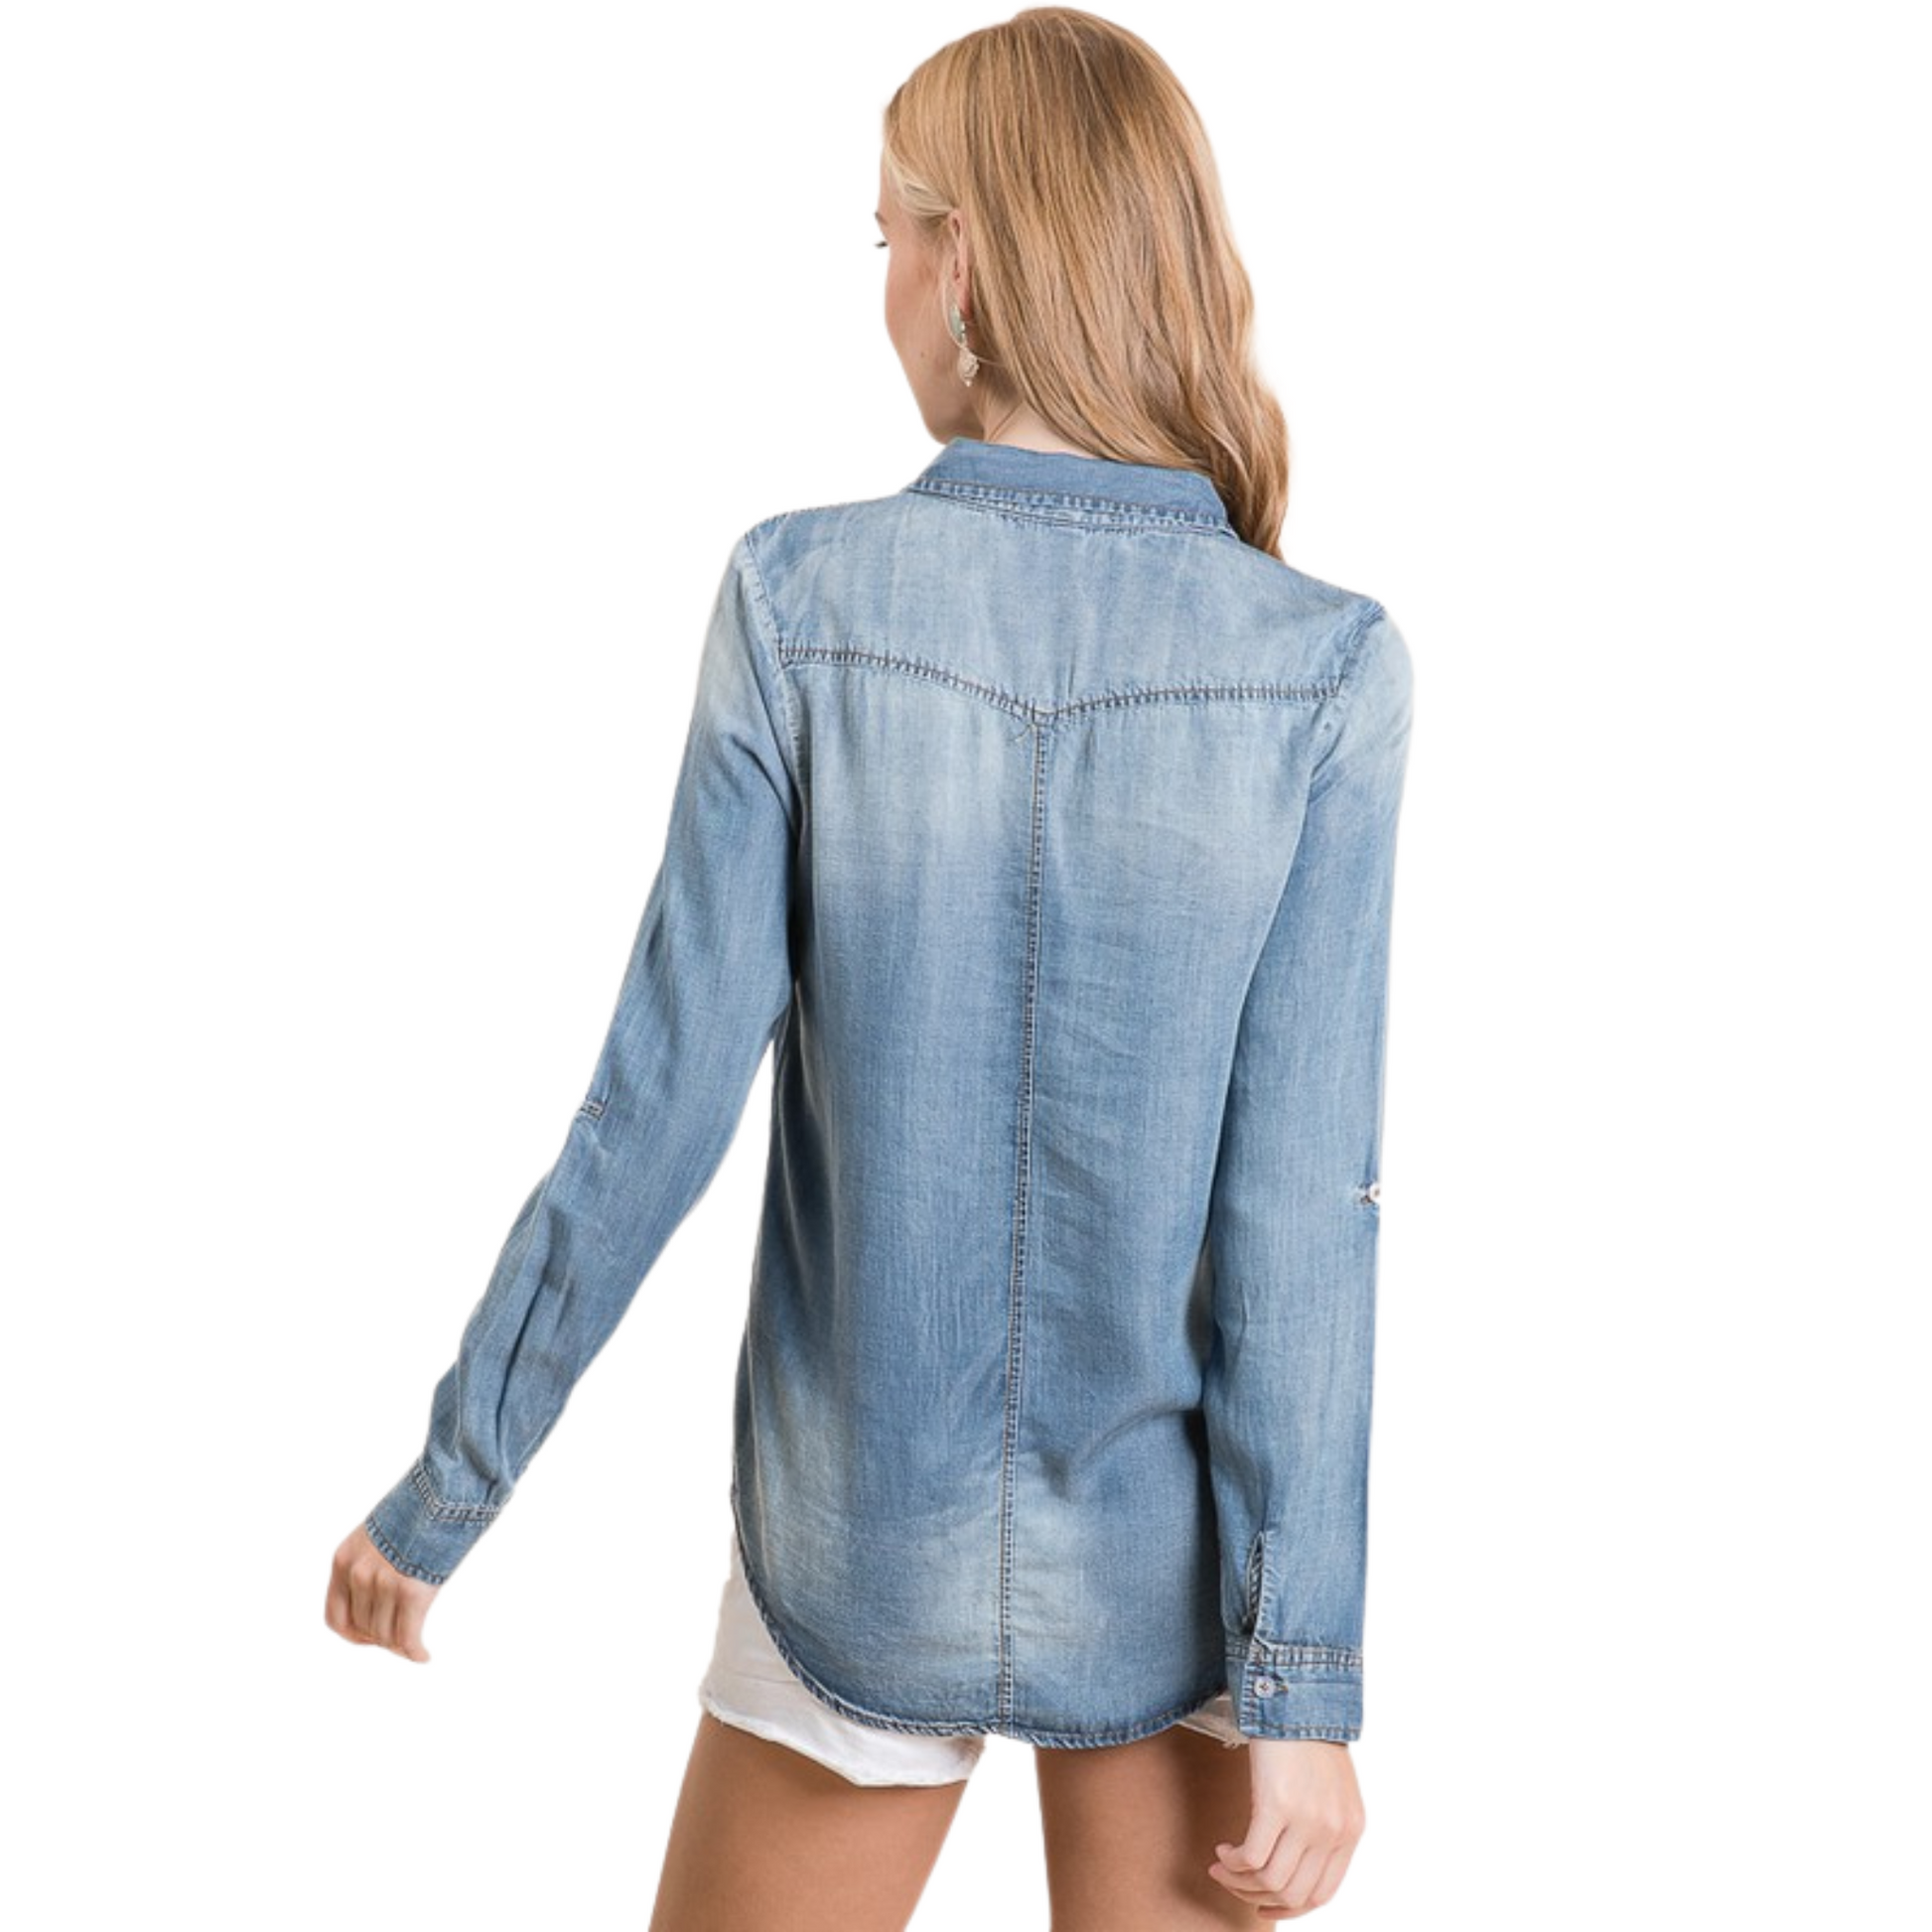 This lightweight, collared denim jacket is made of durable and soft fabric, providing superior fit and comfort. Its two front pockets add extra convenience and style. Perfect for everyday wear - you won't regret this versatile wardrobe essential.